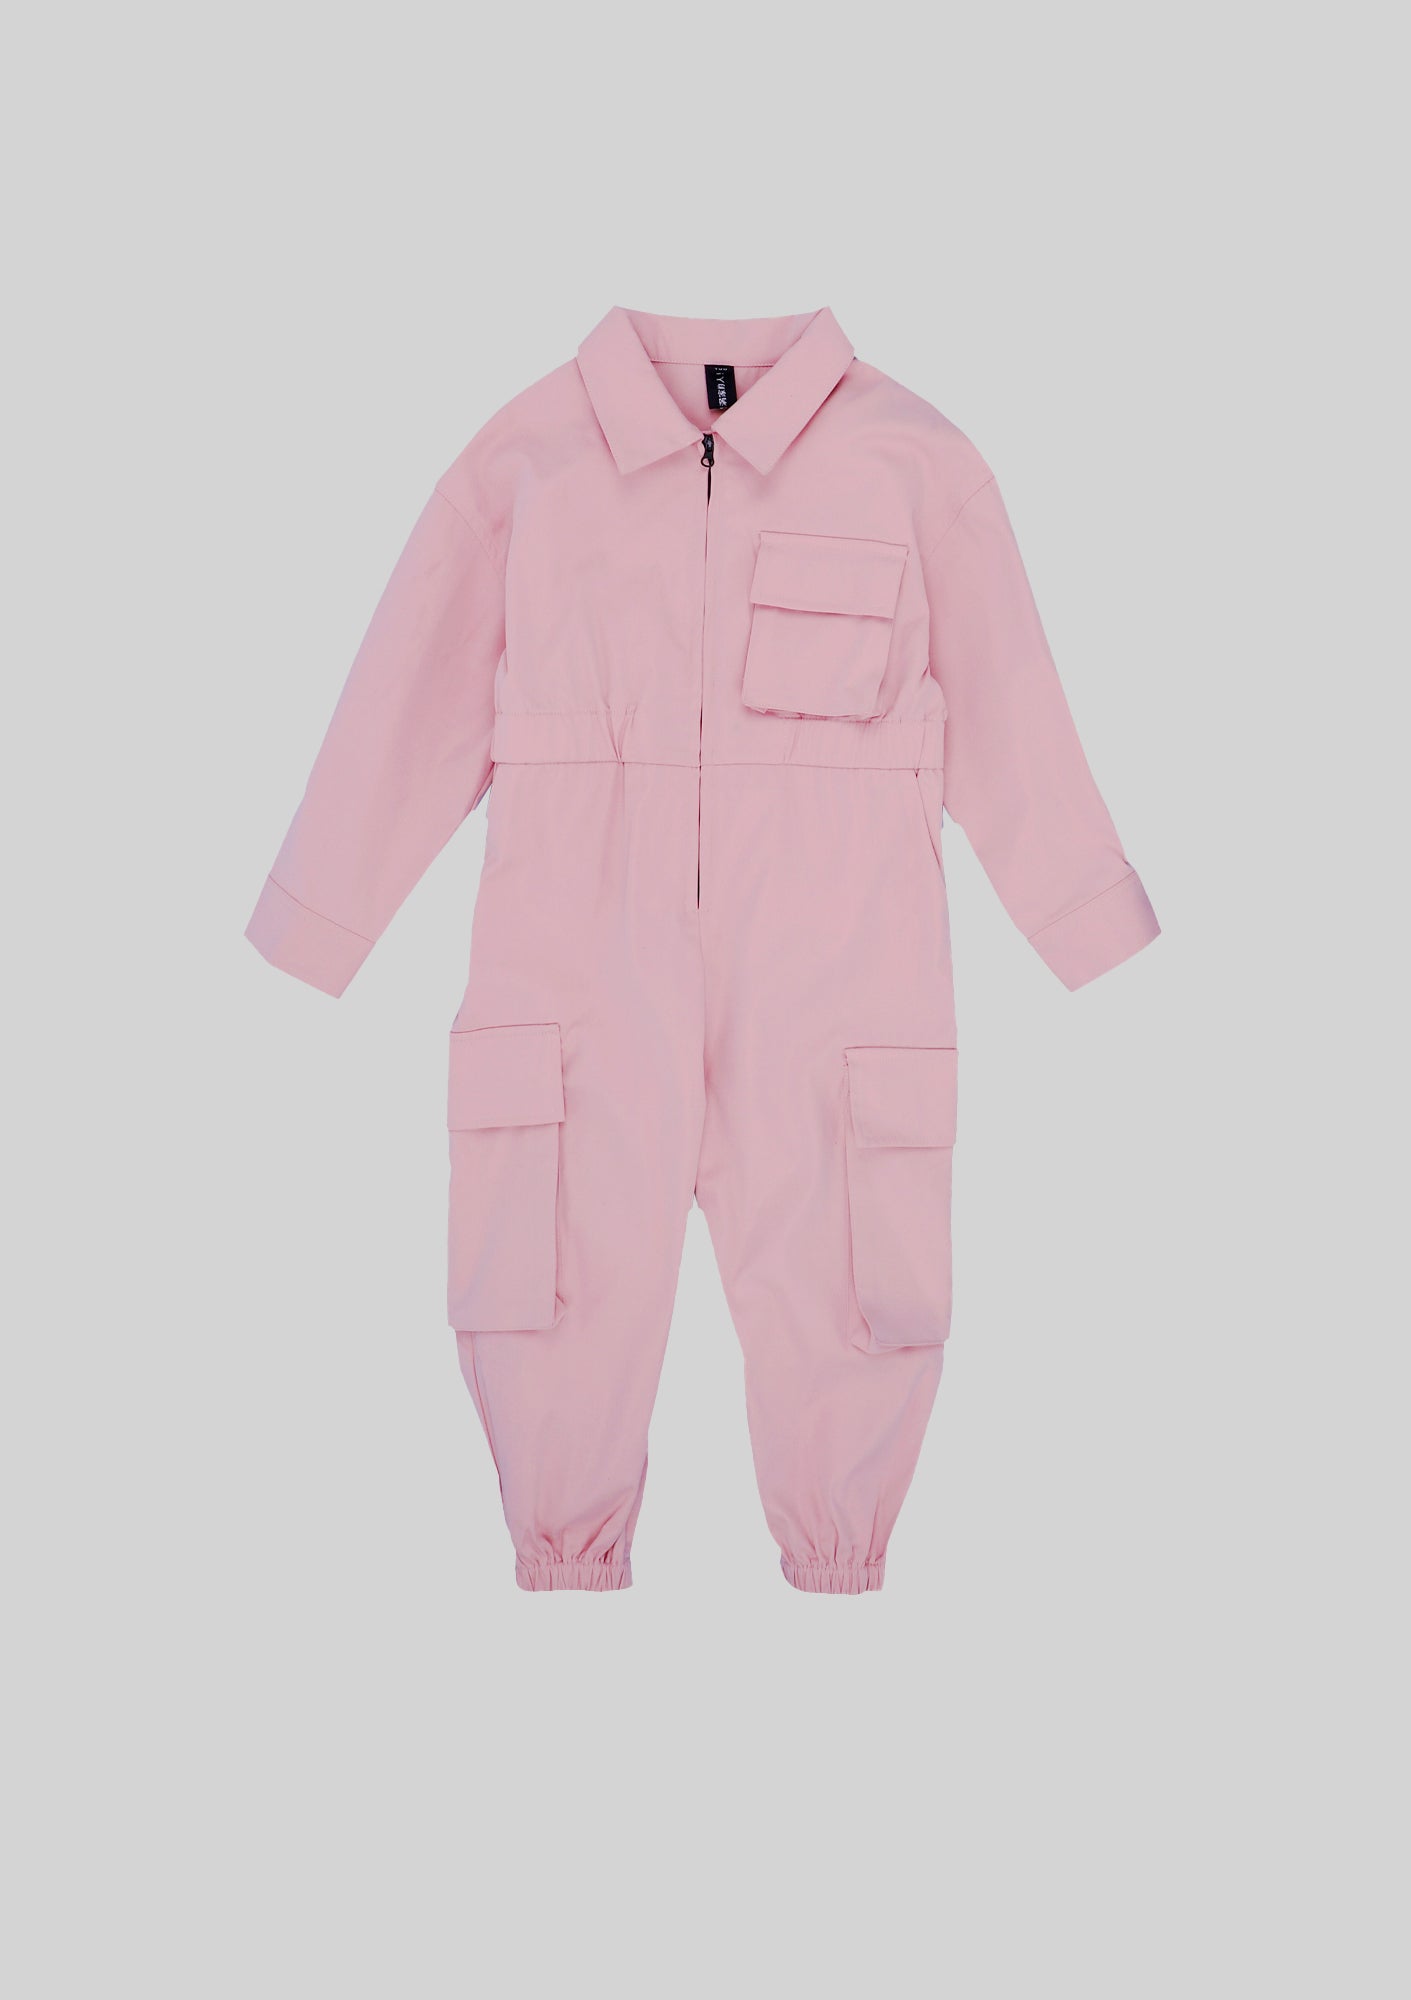 Pink Boilersuit with Chenille 'DCBL' Patch